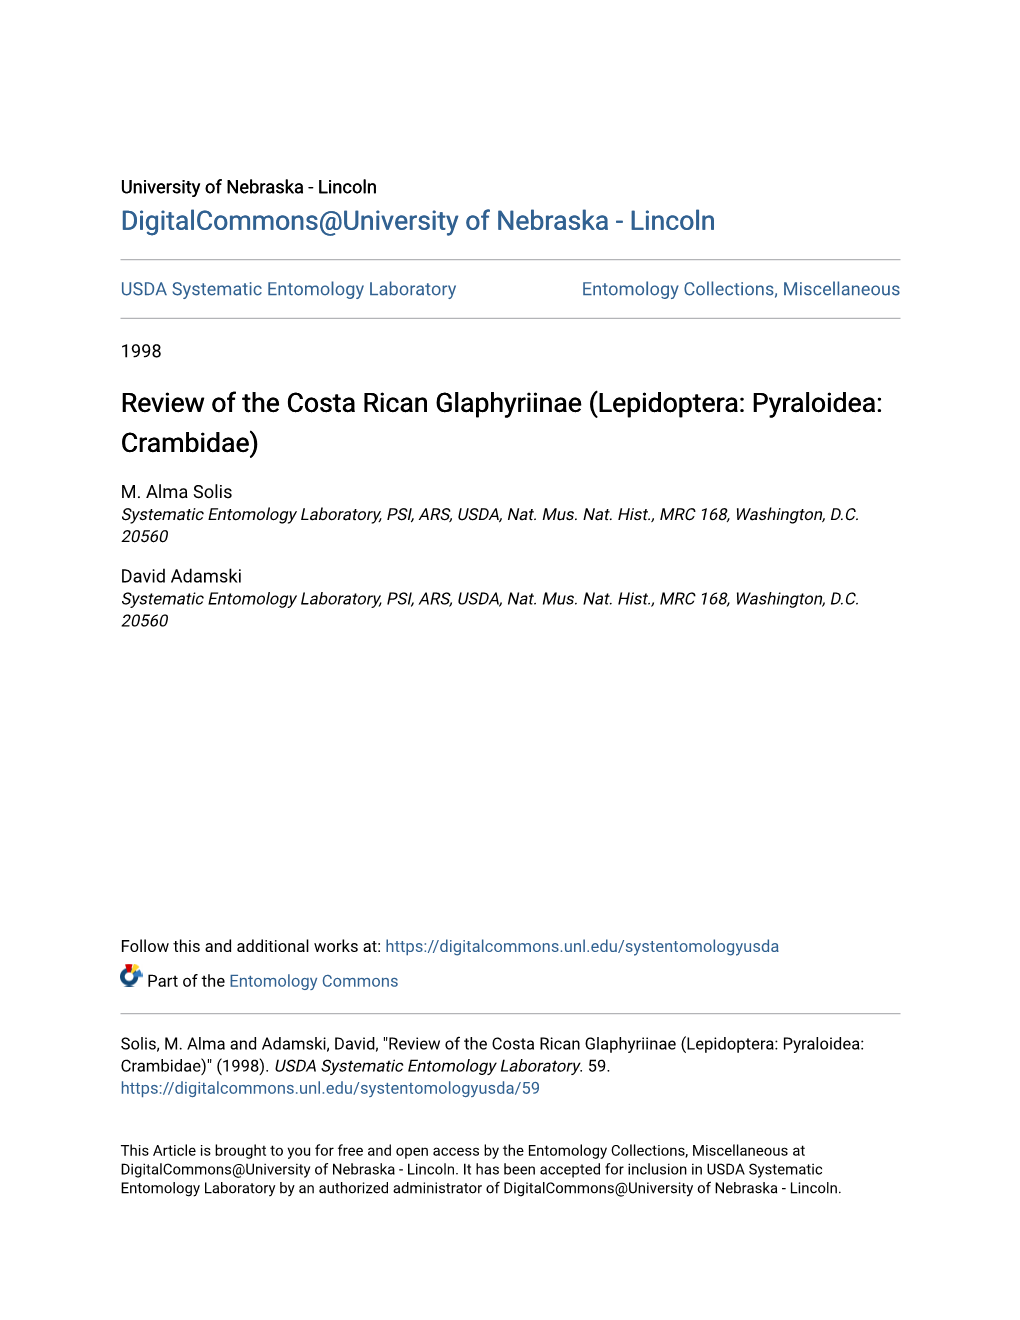 Review of the Costa Rican Glaphyriinae (Lepidoptera: Pyraloidea: Crambidae)